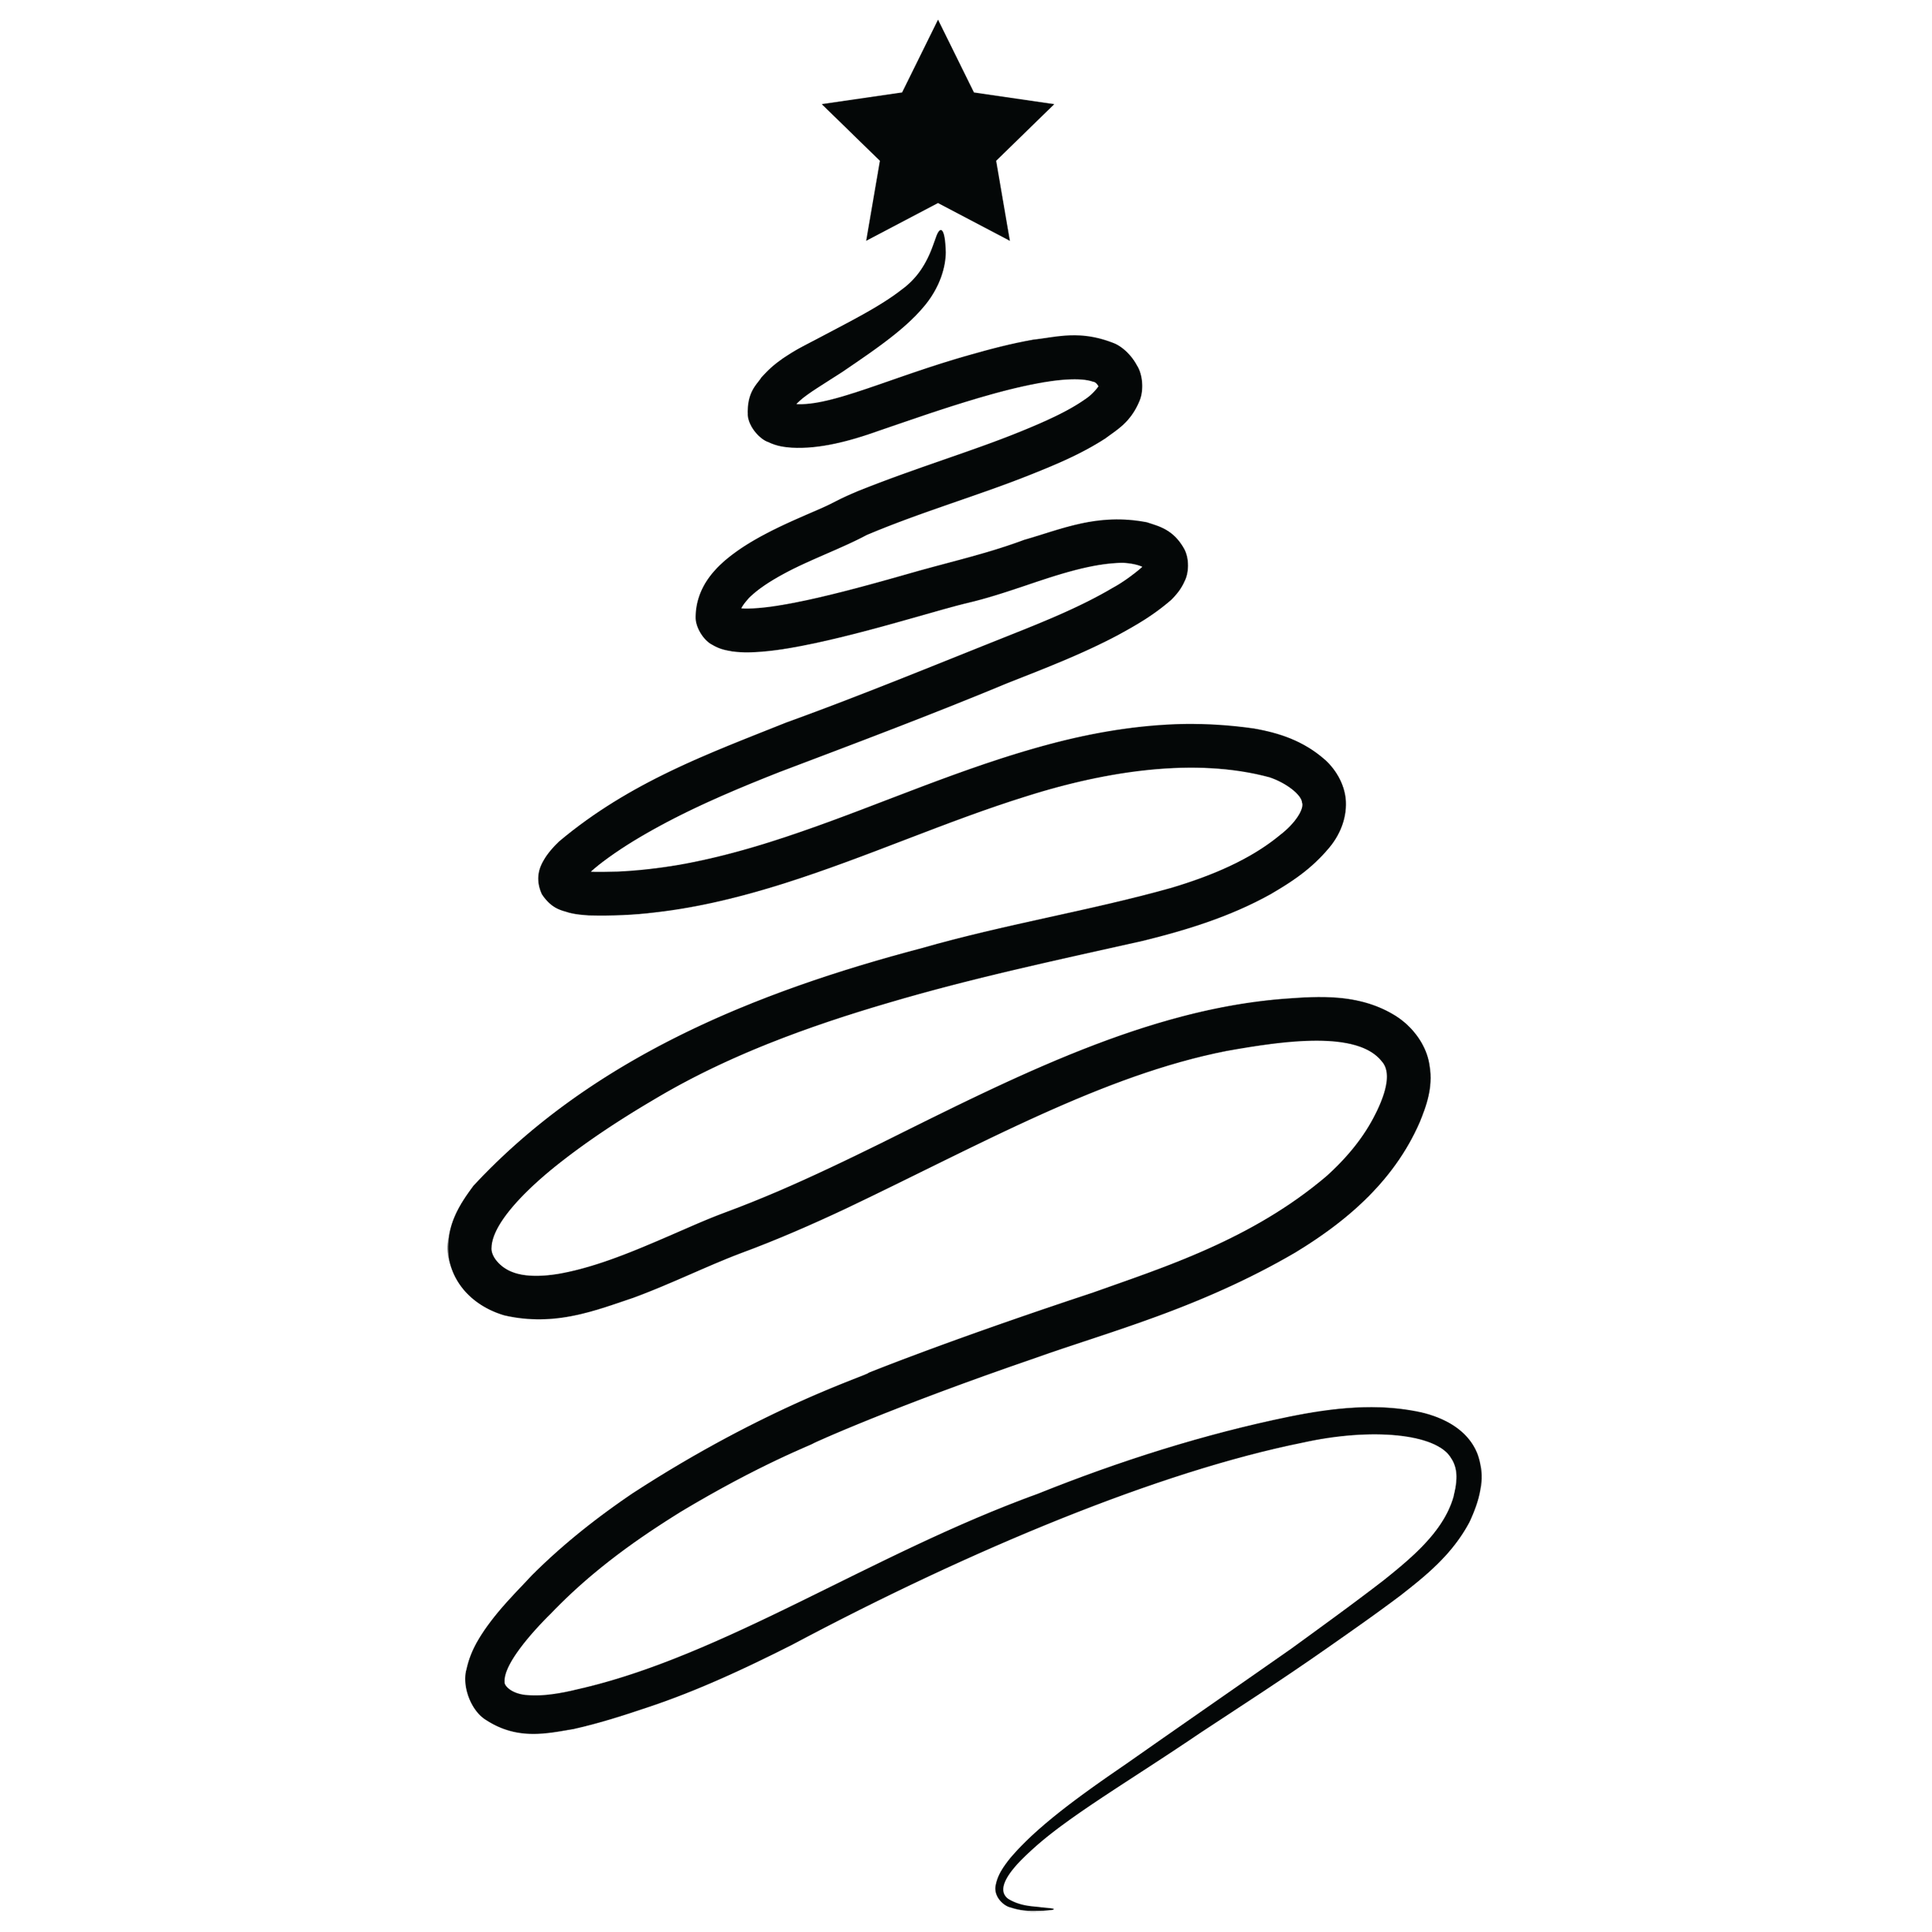 Christmas Tree Silhouette | Free Download Clip Art | Free Clip Art ...